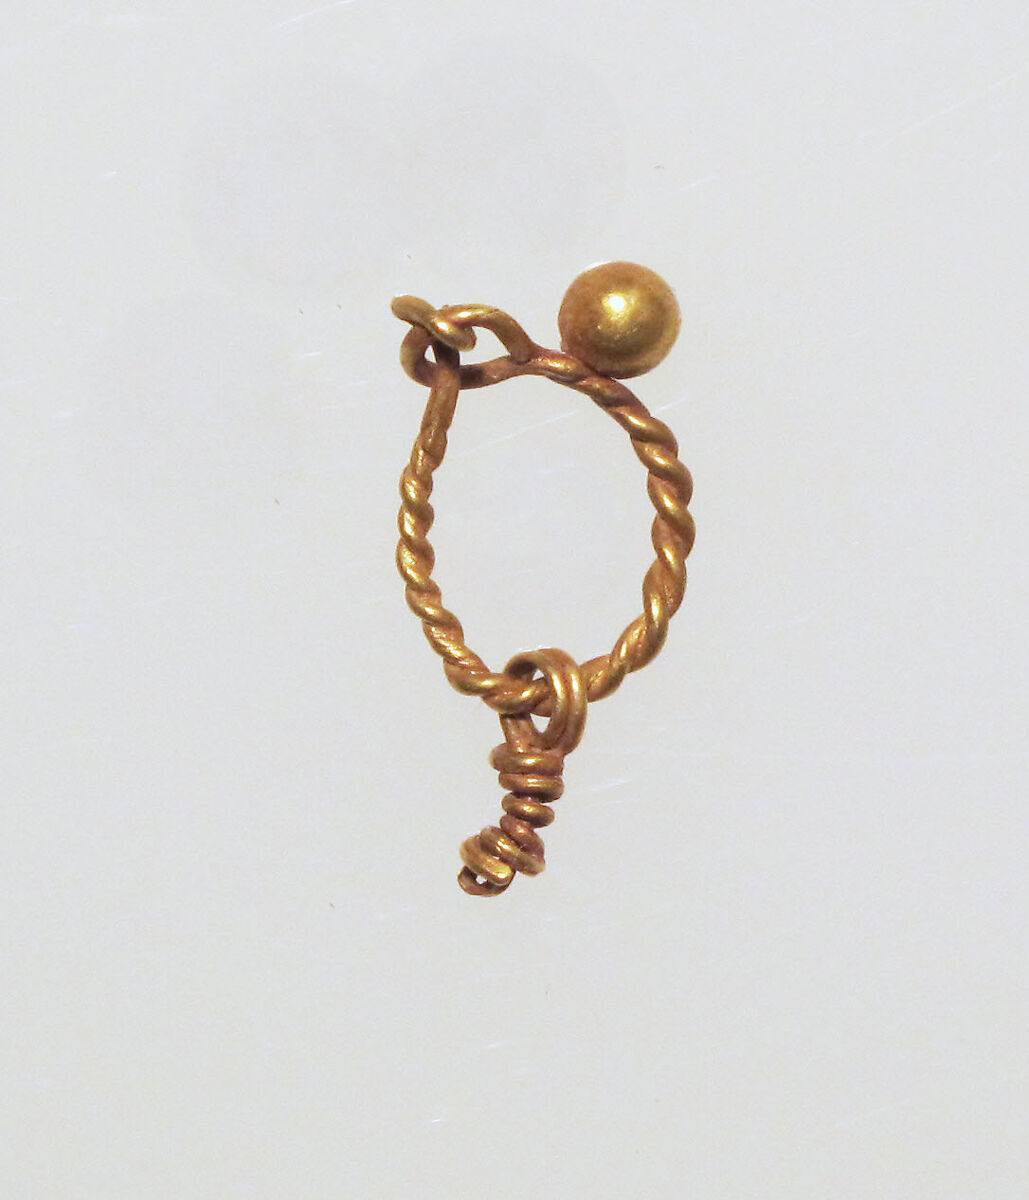 Gold earring with ball stud and pendant (missing), Gold, Roman 